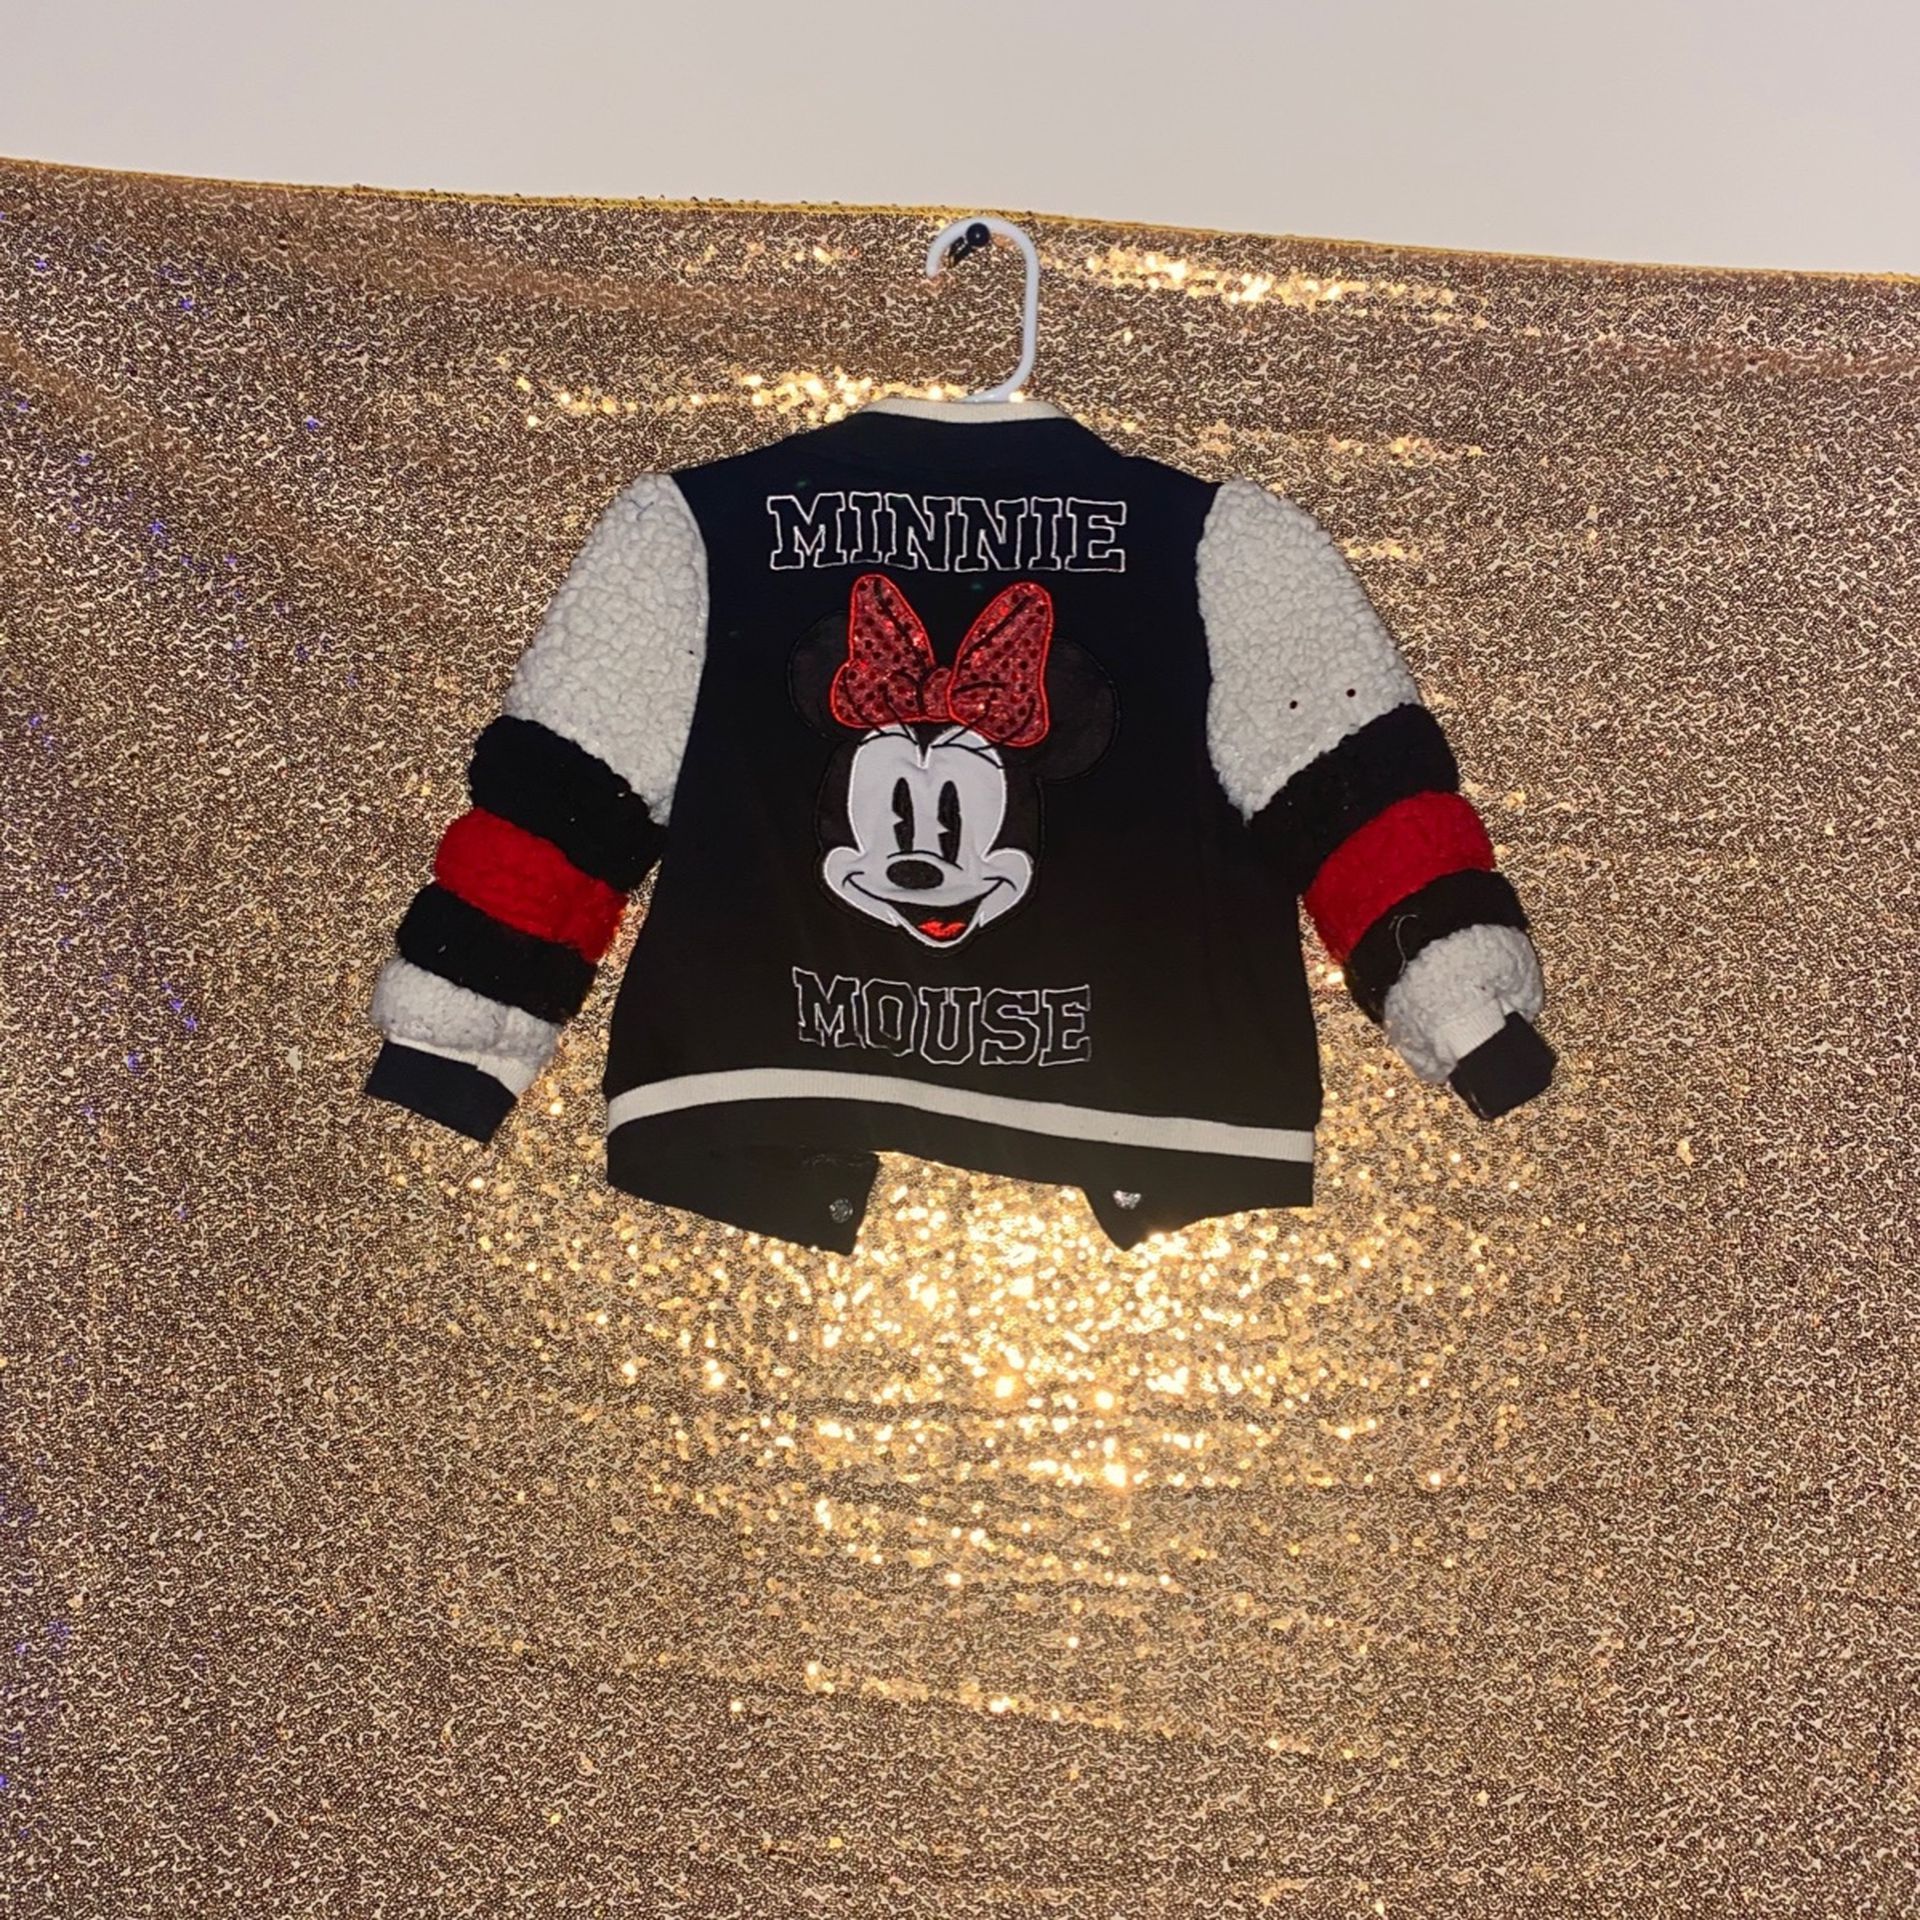 2t Minnie Mouse Jacket $20